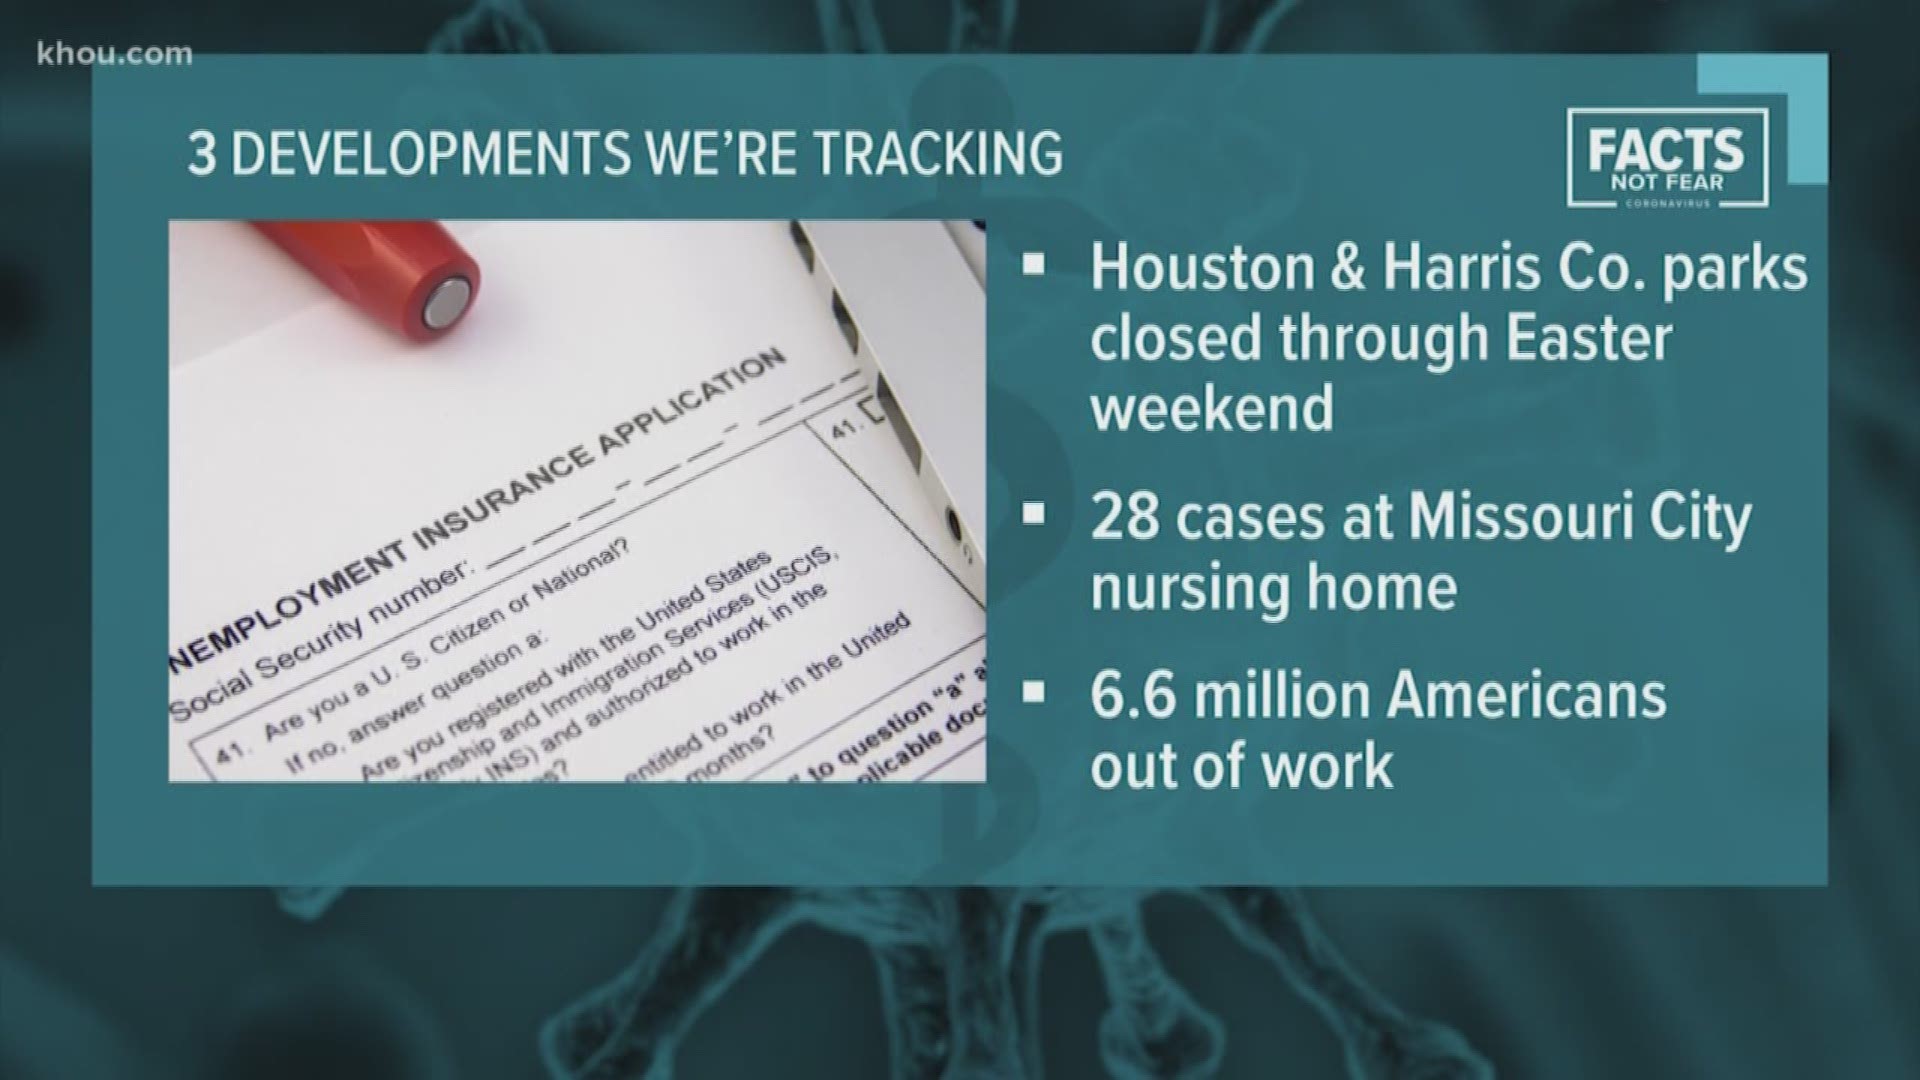 Houston and Harris County parks are closed through the weekend, a COVID-19 outbreak at a Missouri City nursing home, and grim unemployment news.